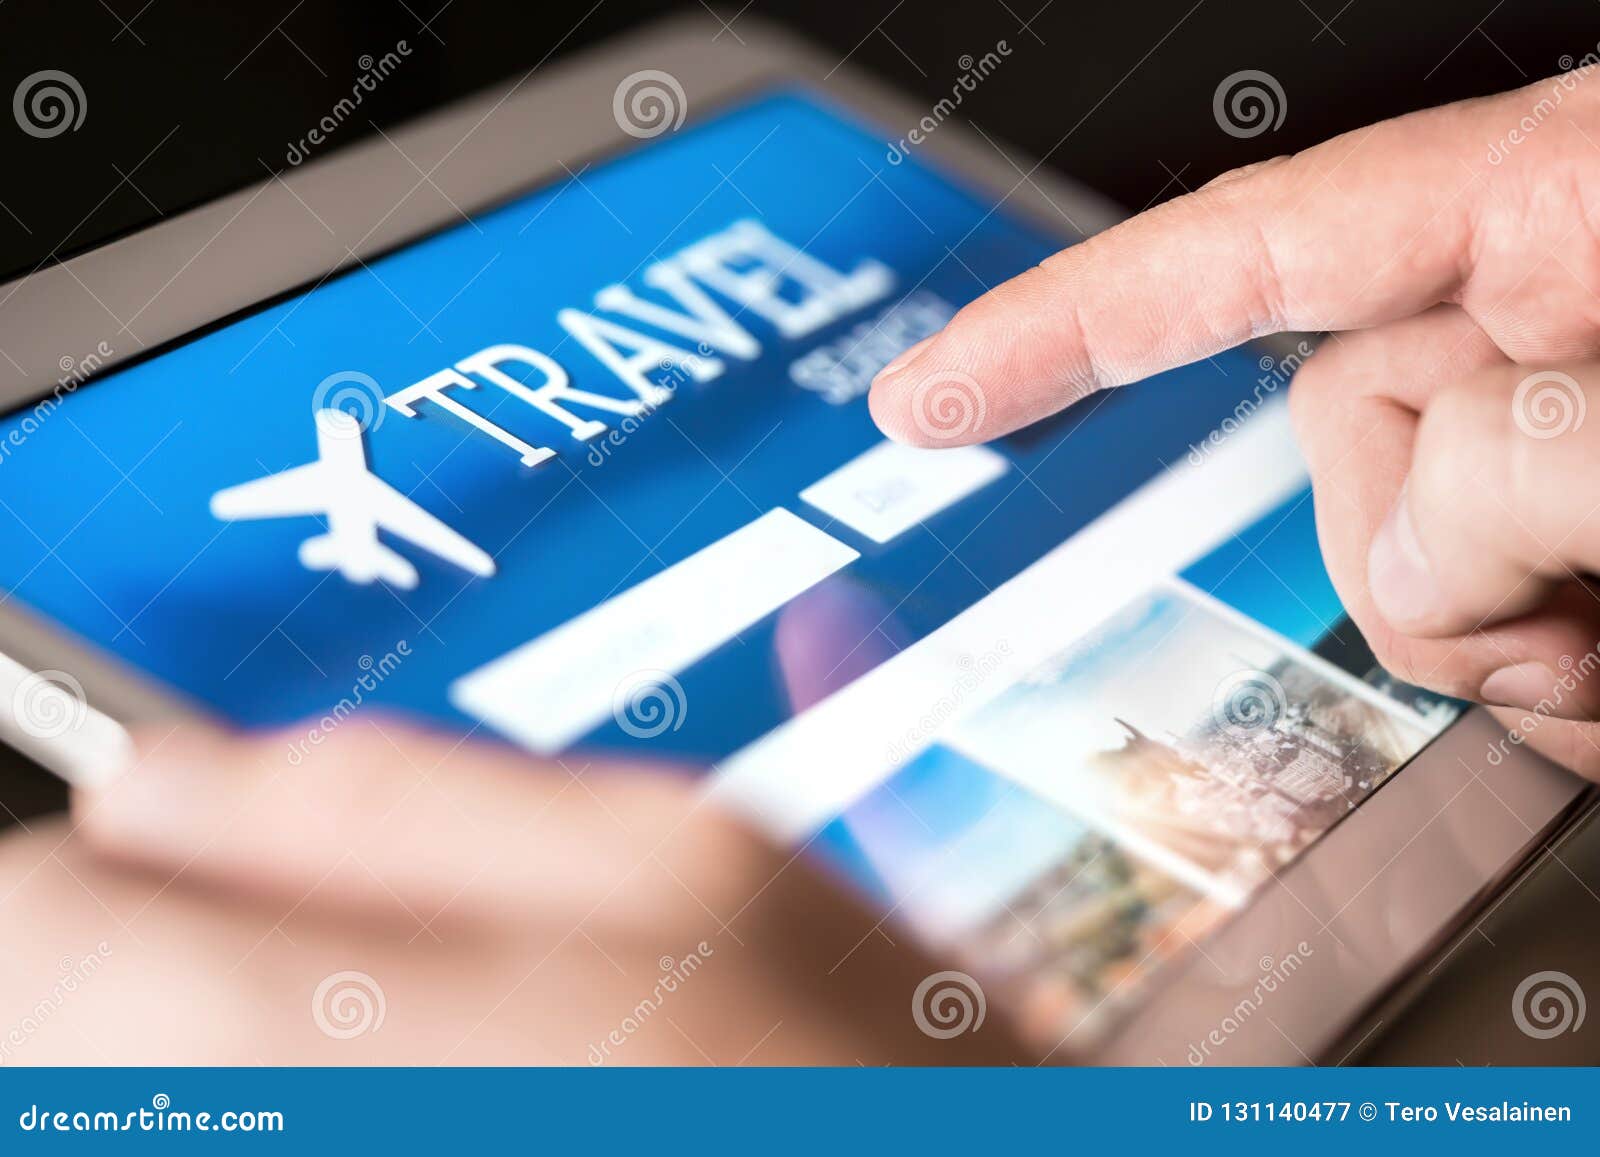 travel search engine and website for holidays. man using tablet to look for cheap flights and hotels.